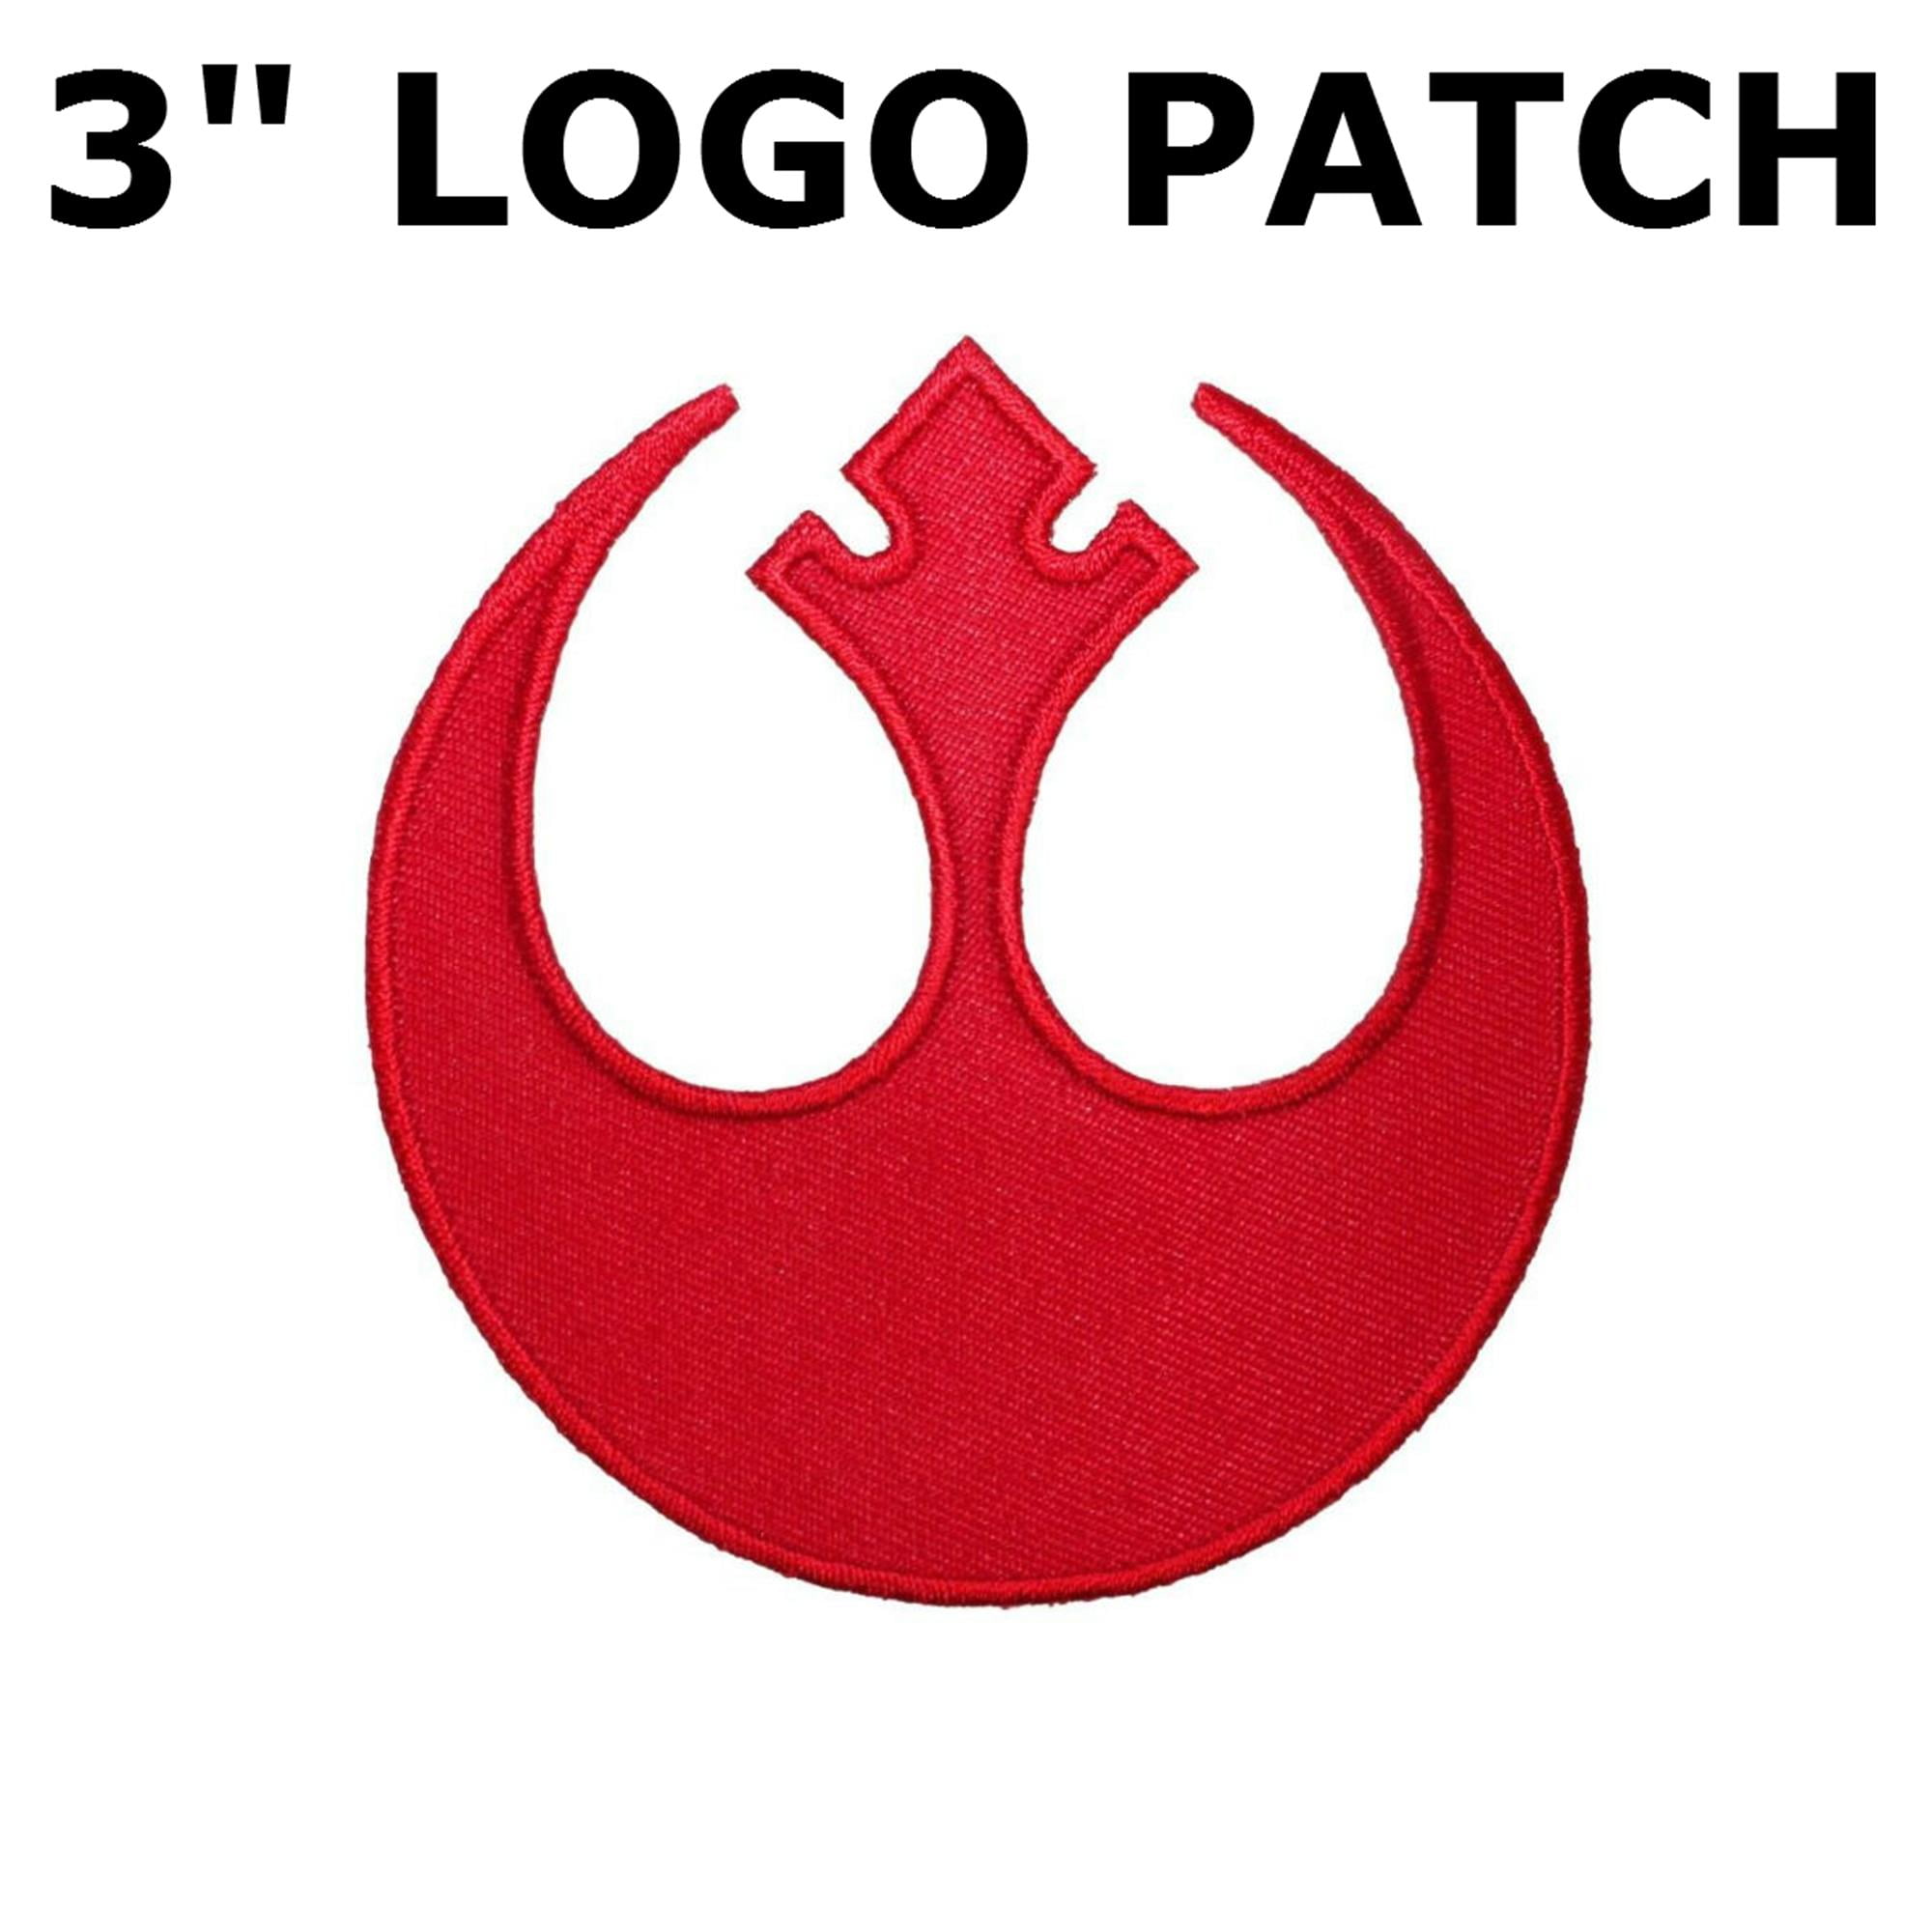 STAR WARS Rebel Alliance embroidered iron on badges Patches 